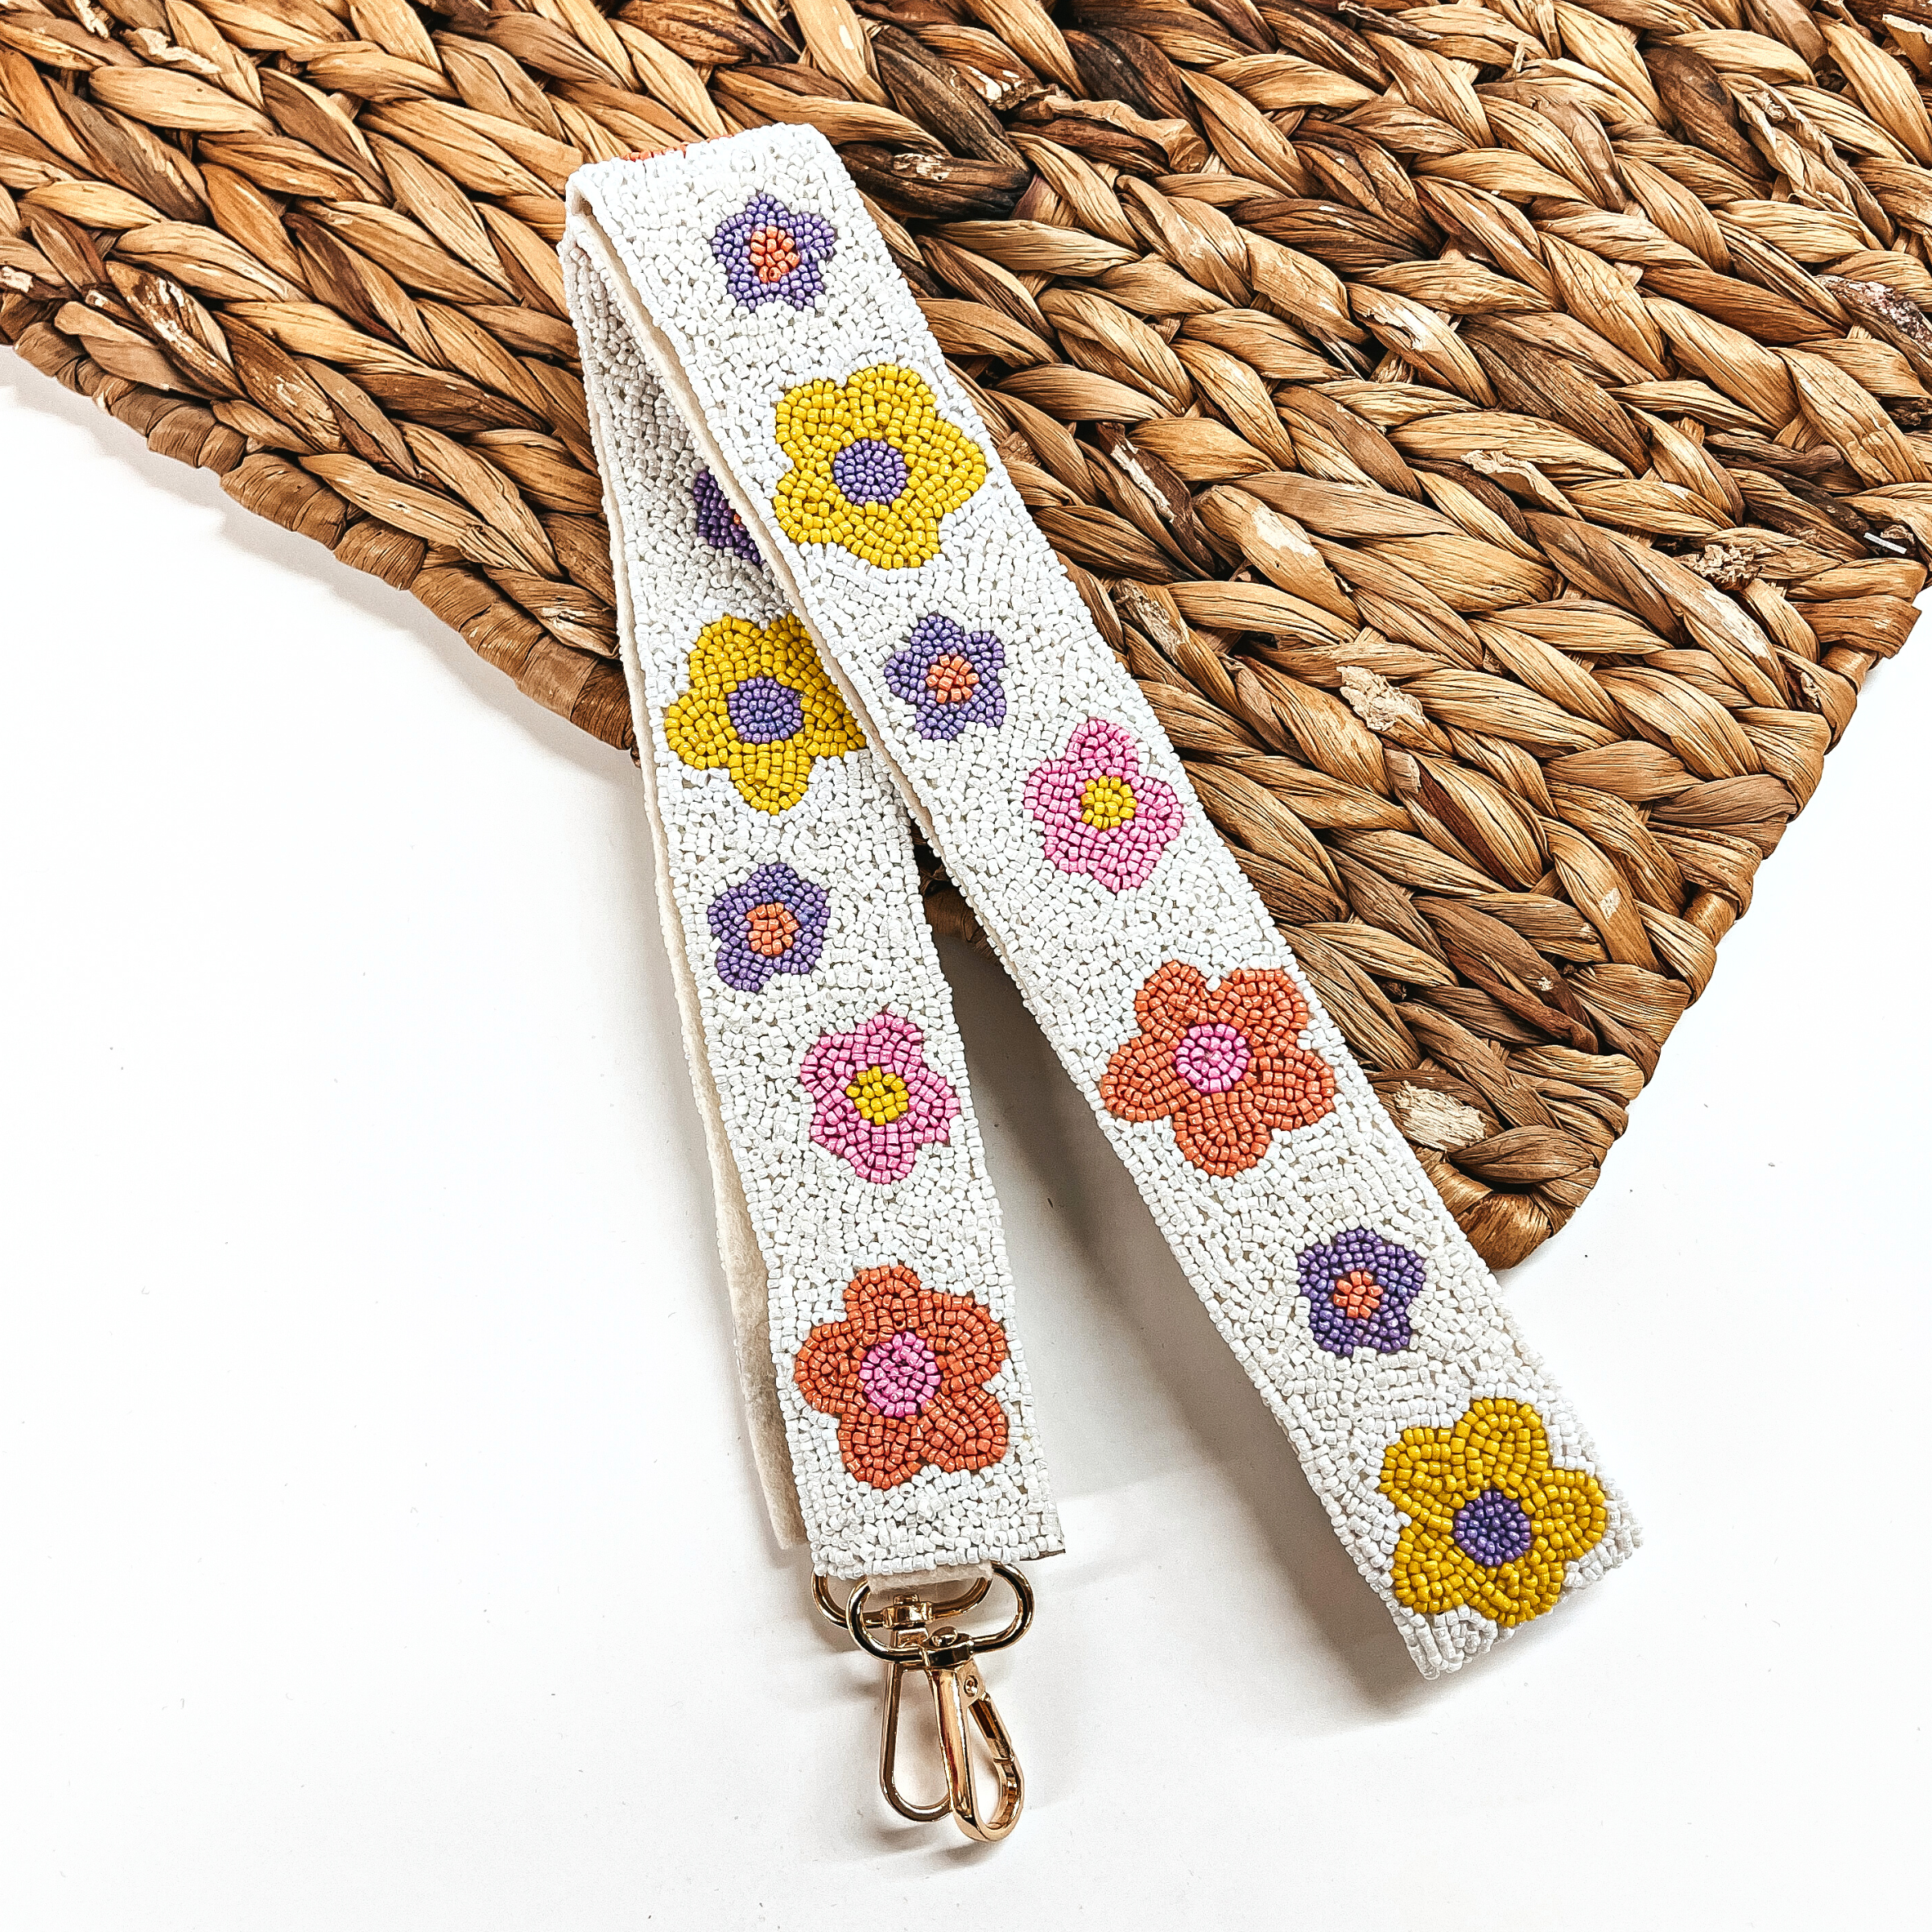 This is a white beaded purse strap with pastel colored flowers all along in different sizes, with a gold clasp. This purse strap is taken on a white background and a brown woven slate.